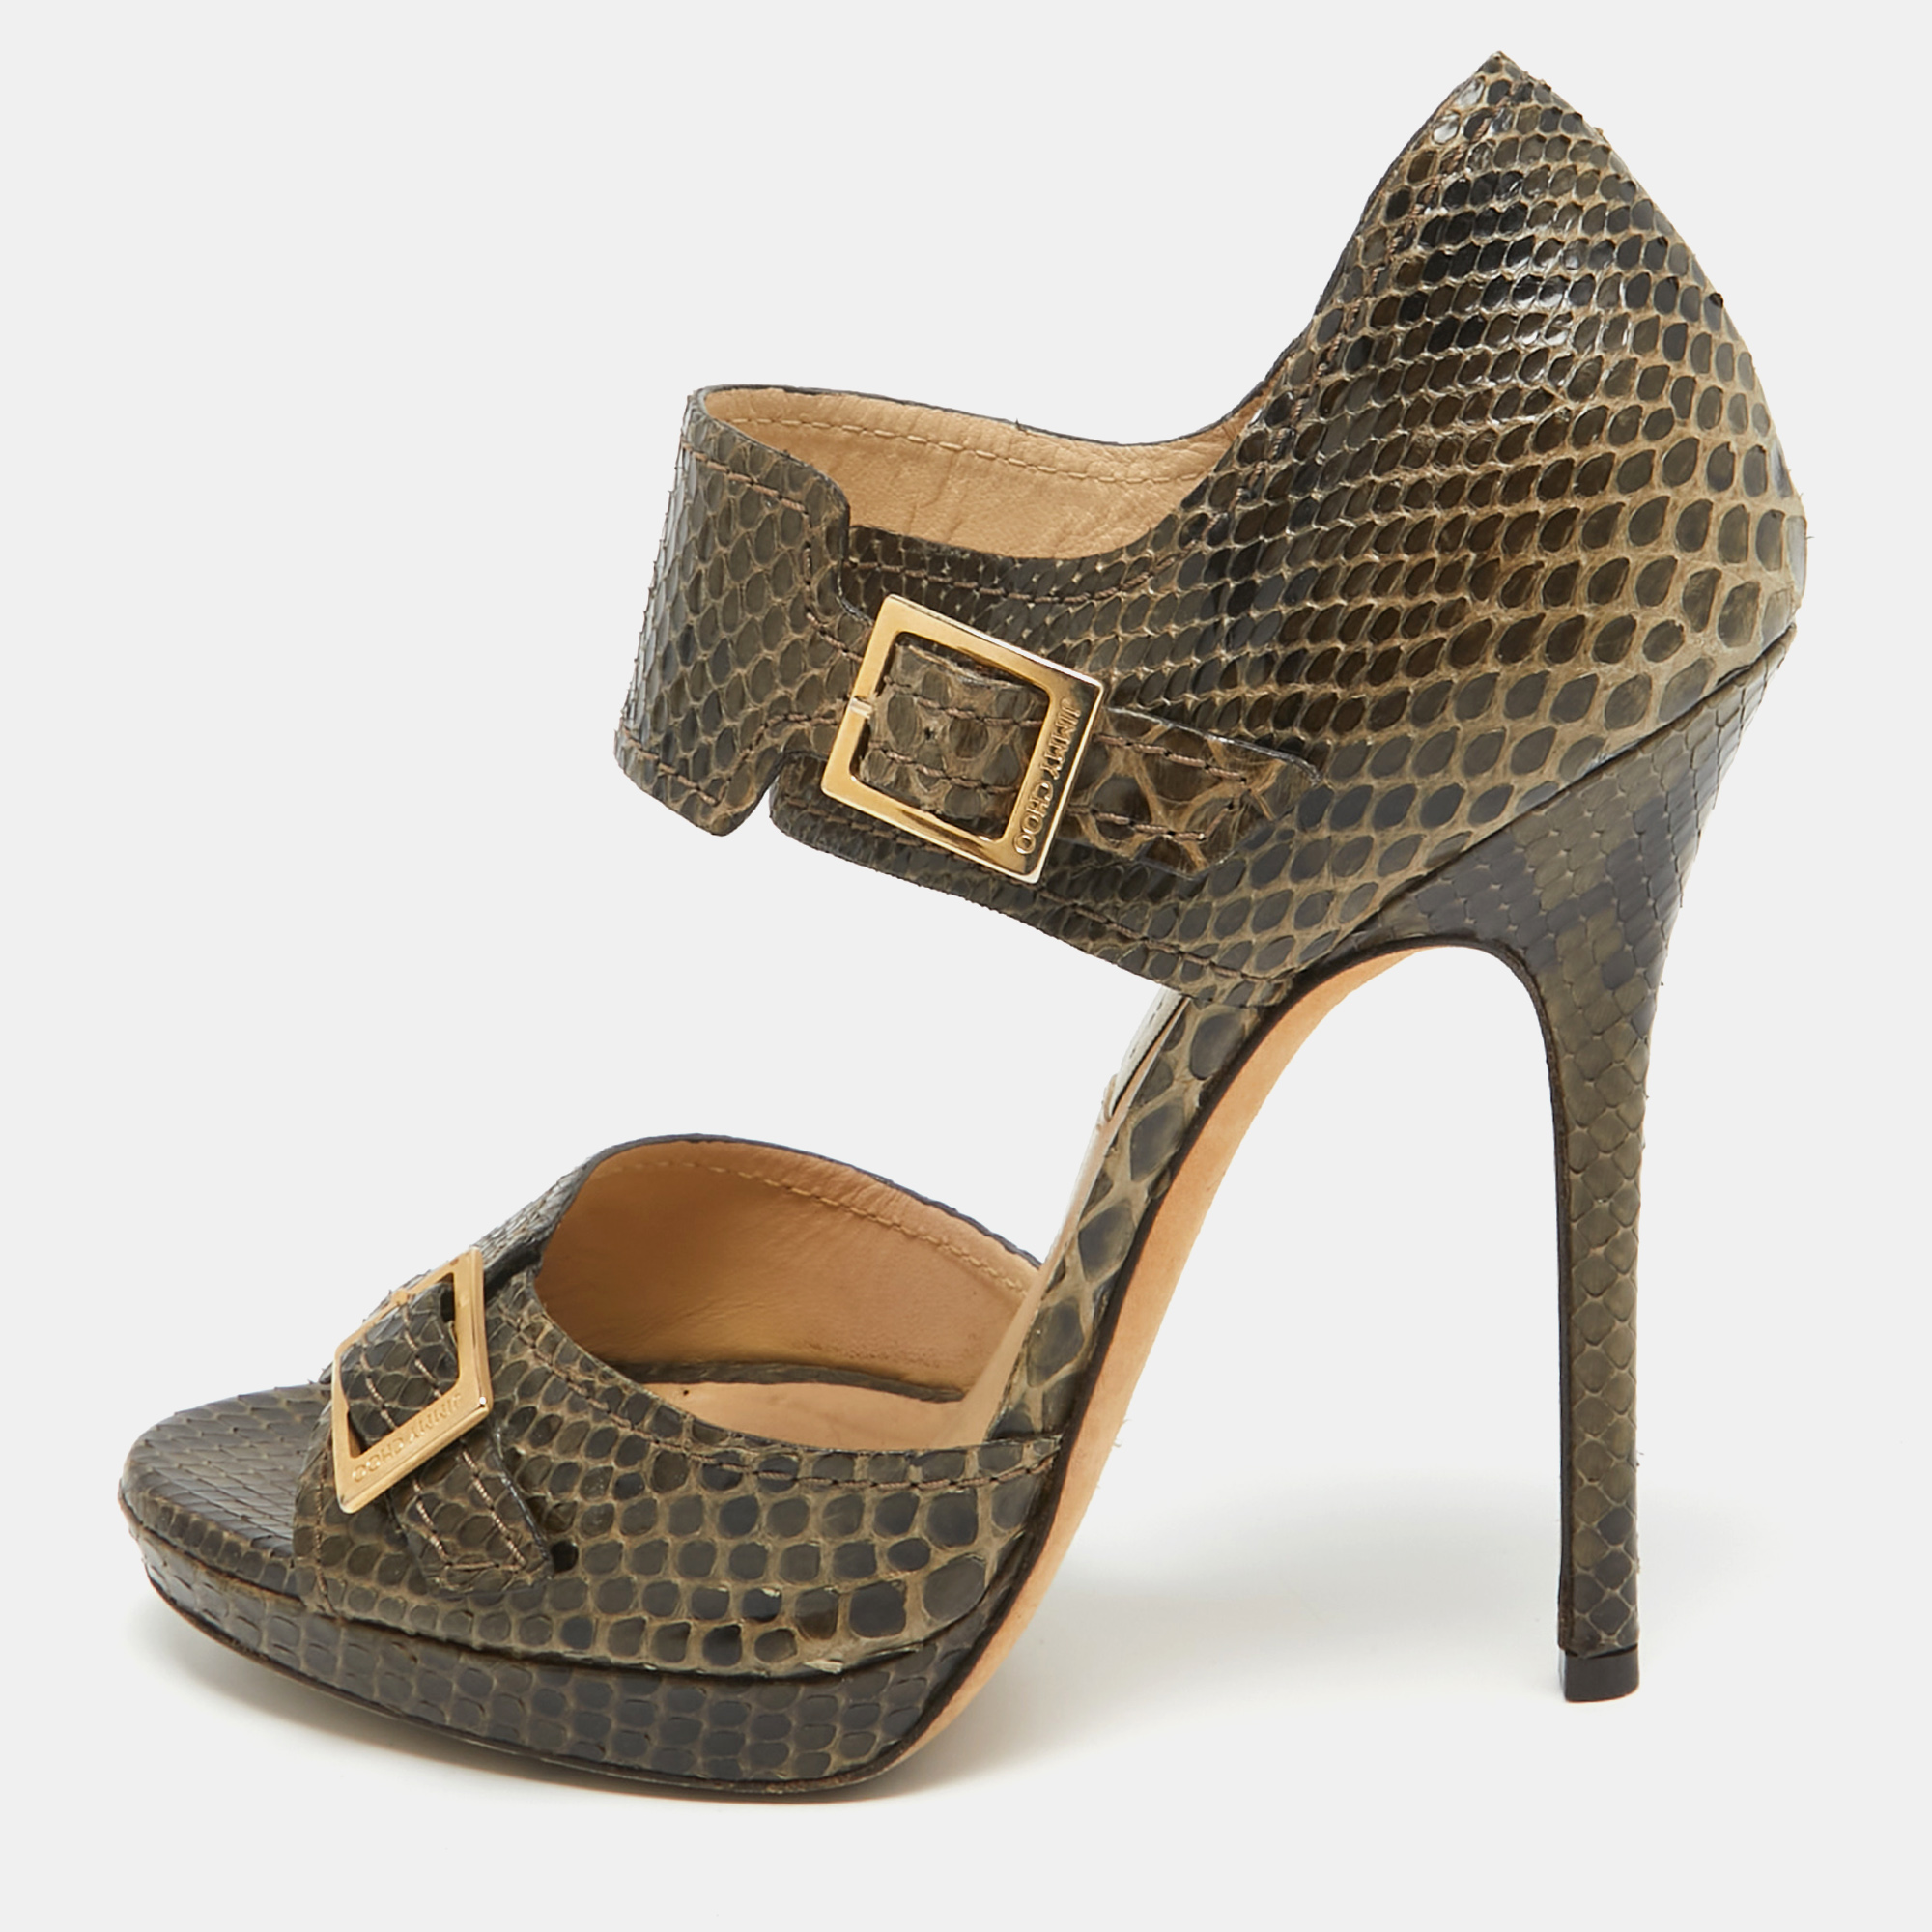 Jimmy choo green/brown python buckle pumps size 36.5